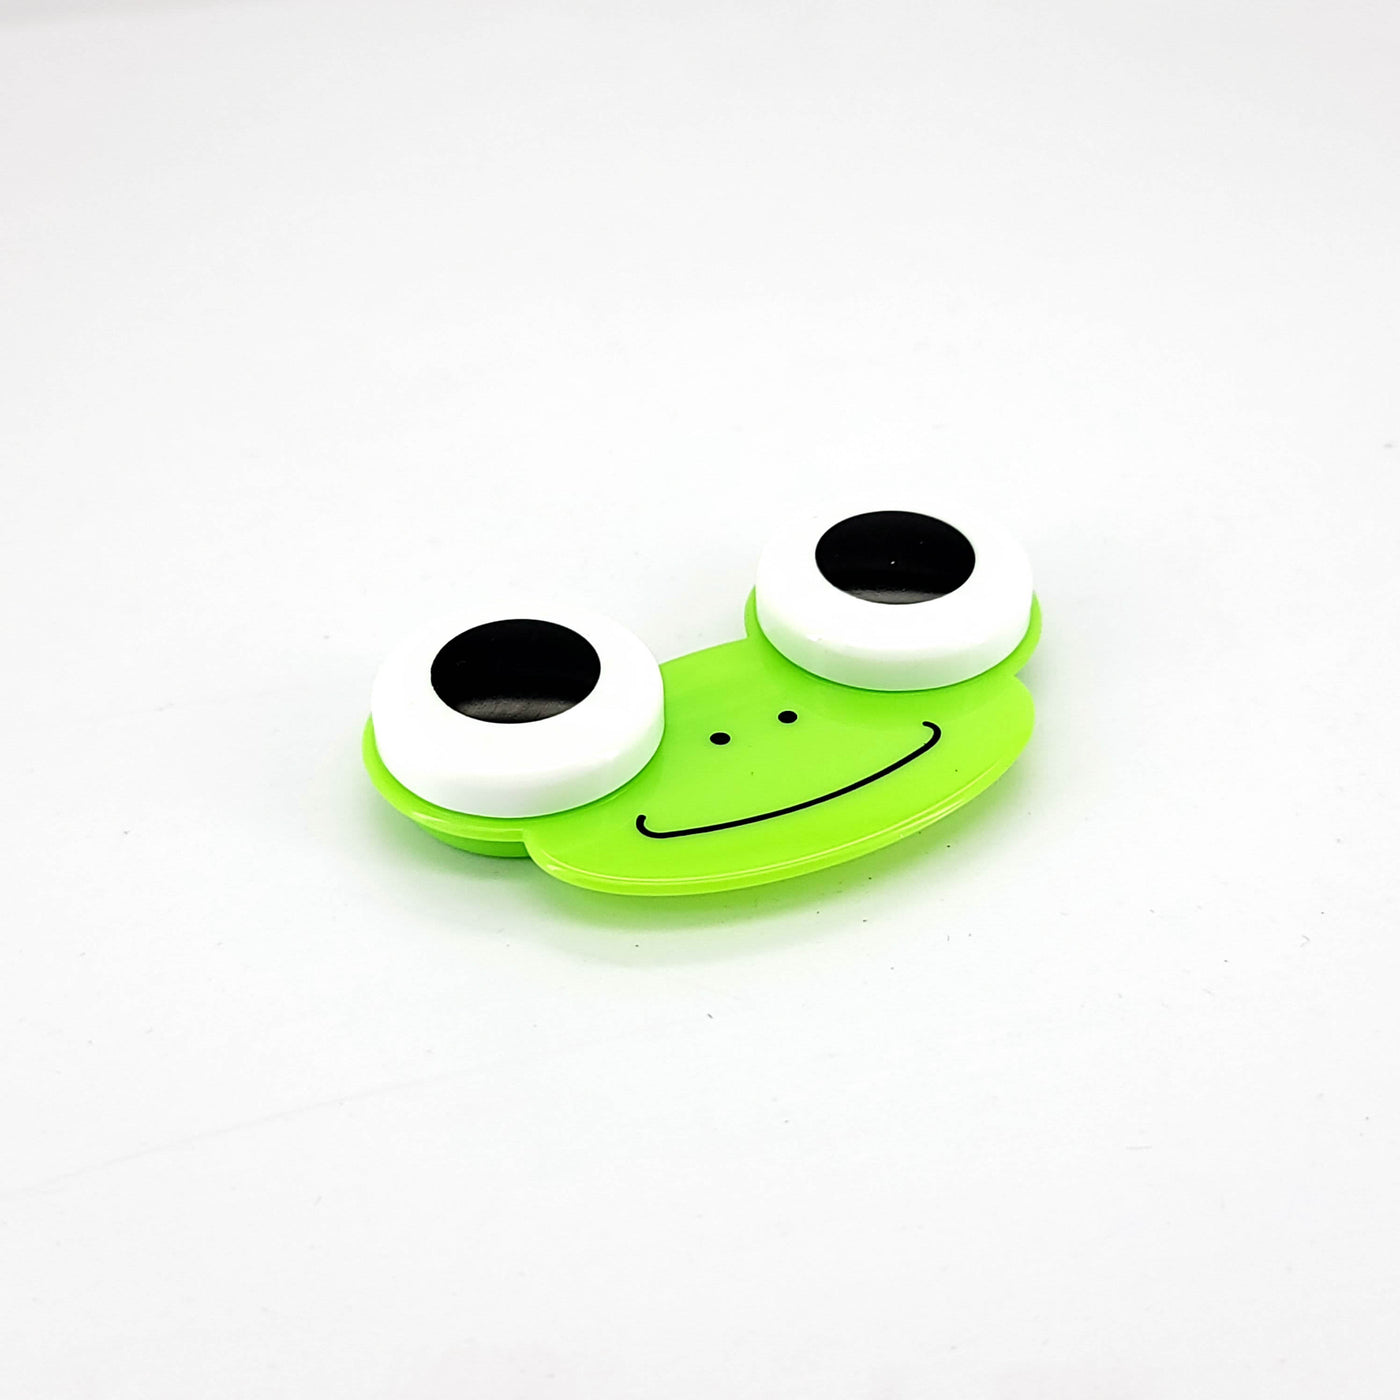 Wildlife Contact Lens Case | Accessories - Vision Express Optical Philippines